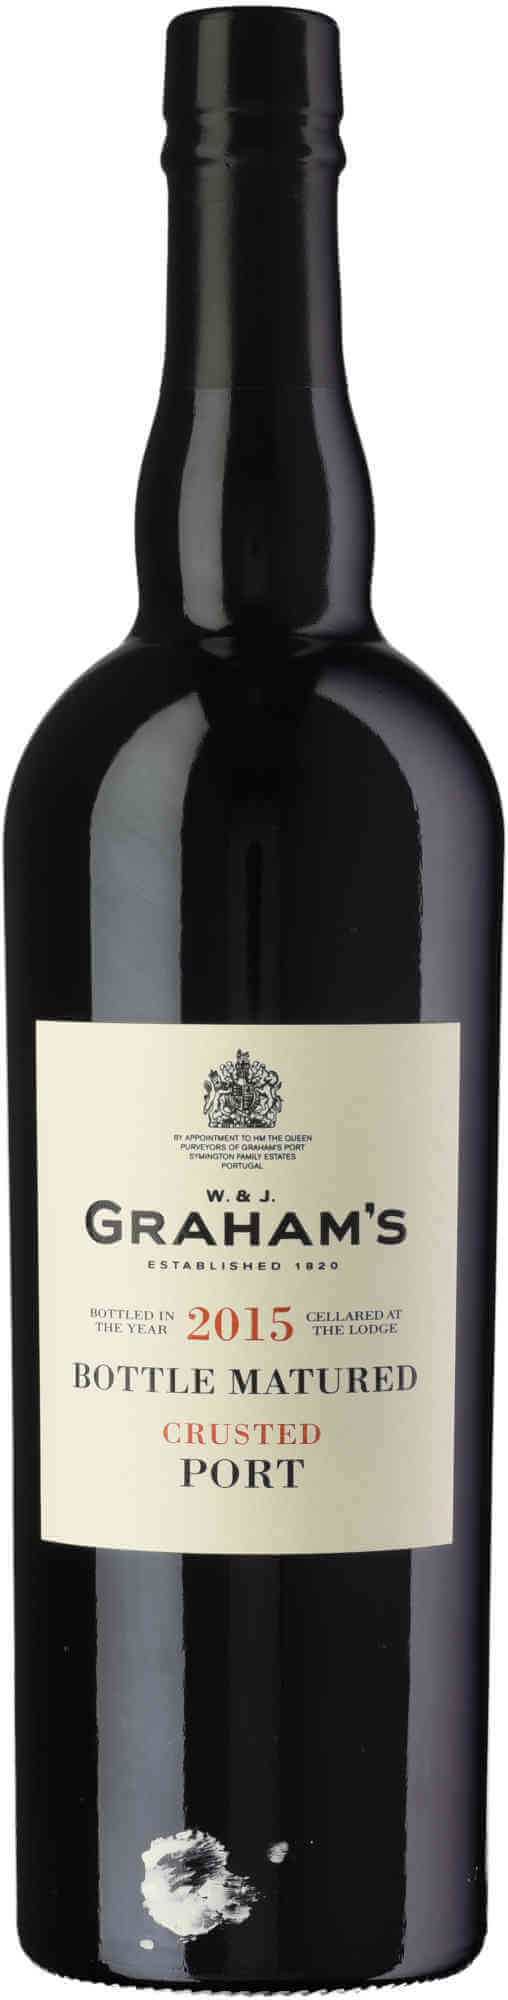 Grahams-Crusted-Port-2015